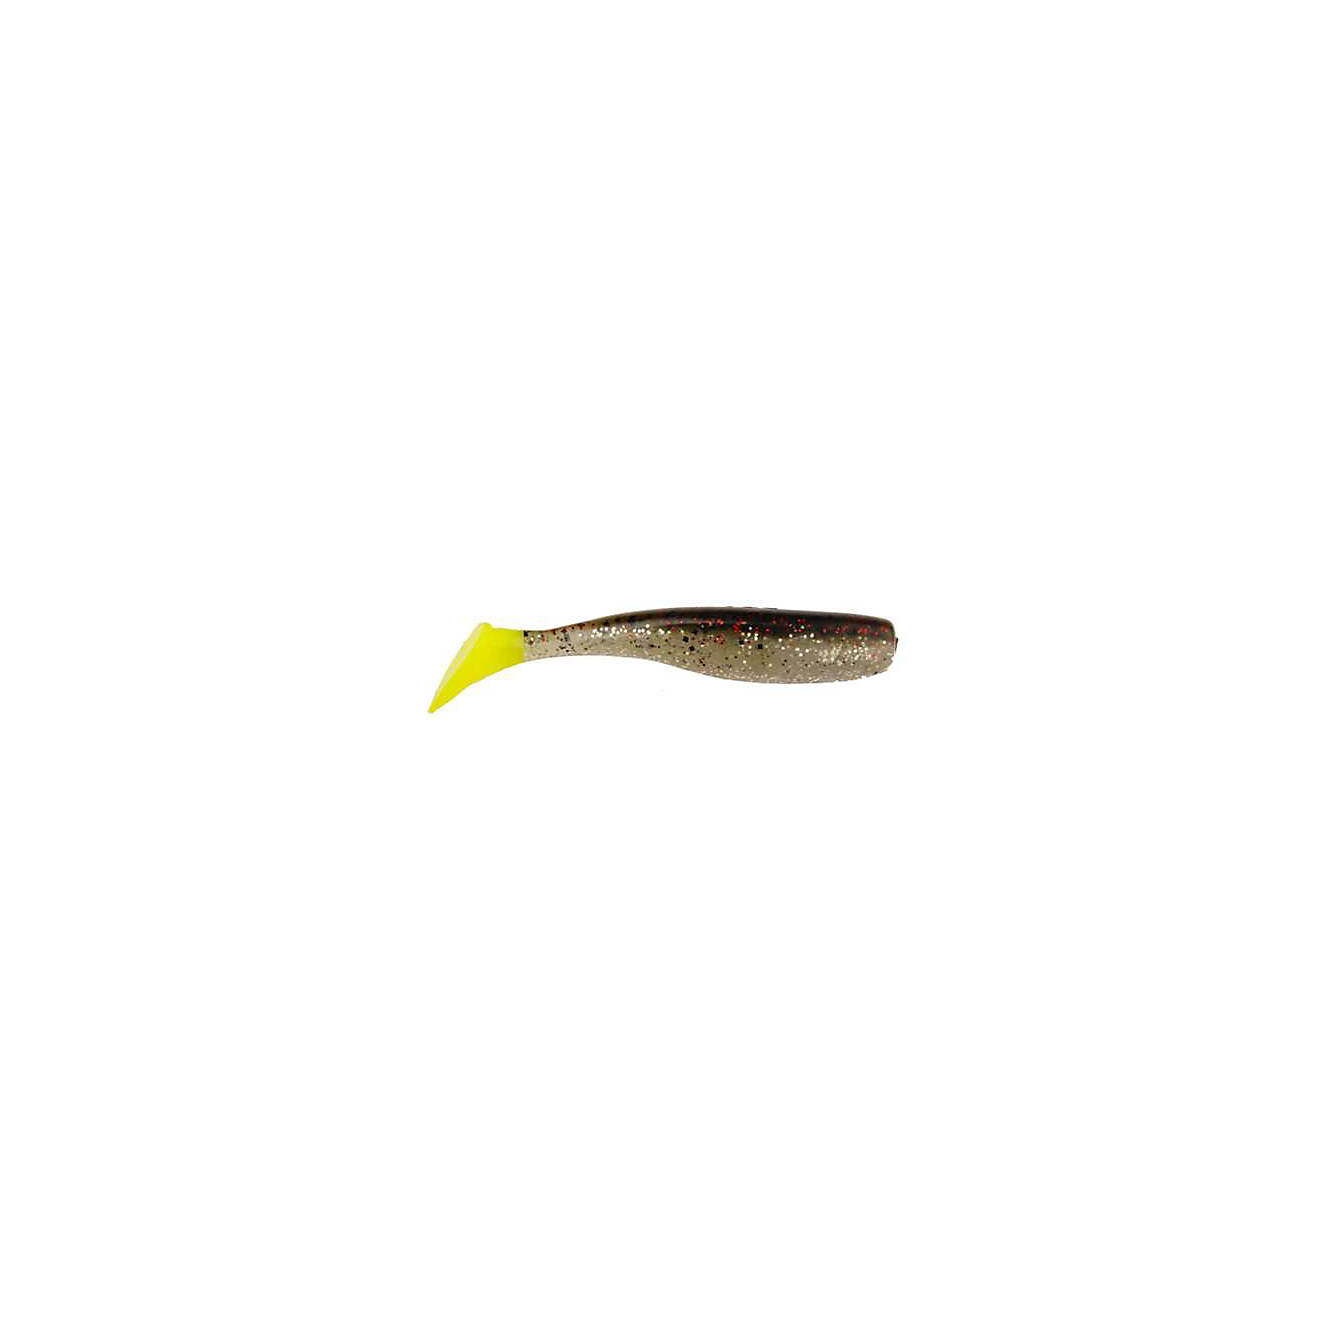 D.O.A. Fishing Lures 3 in Shad Tails 12-Pack